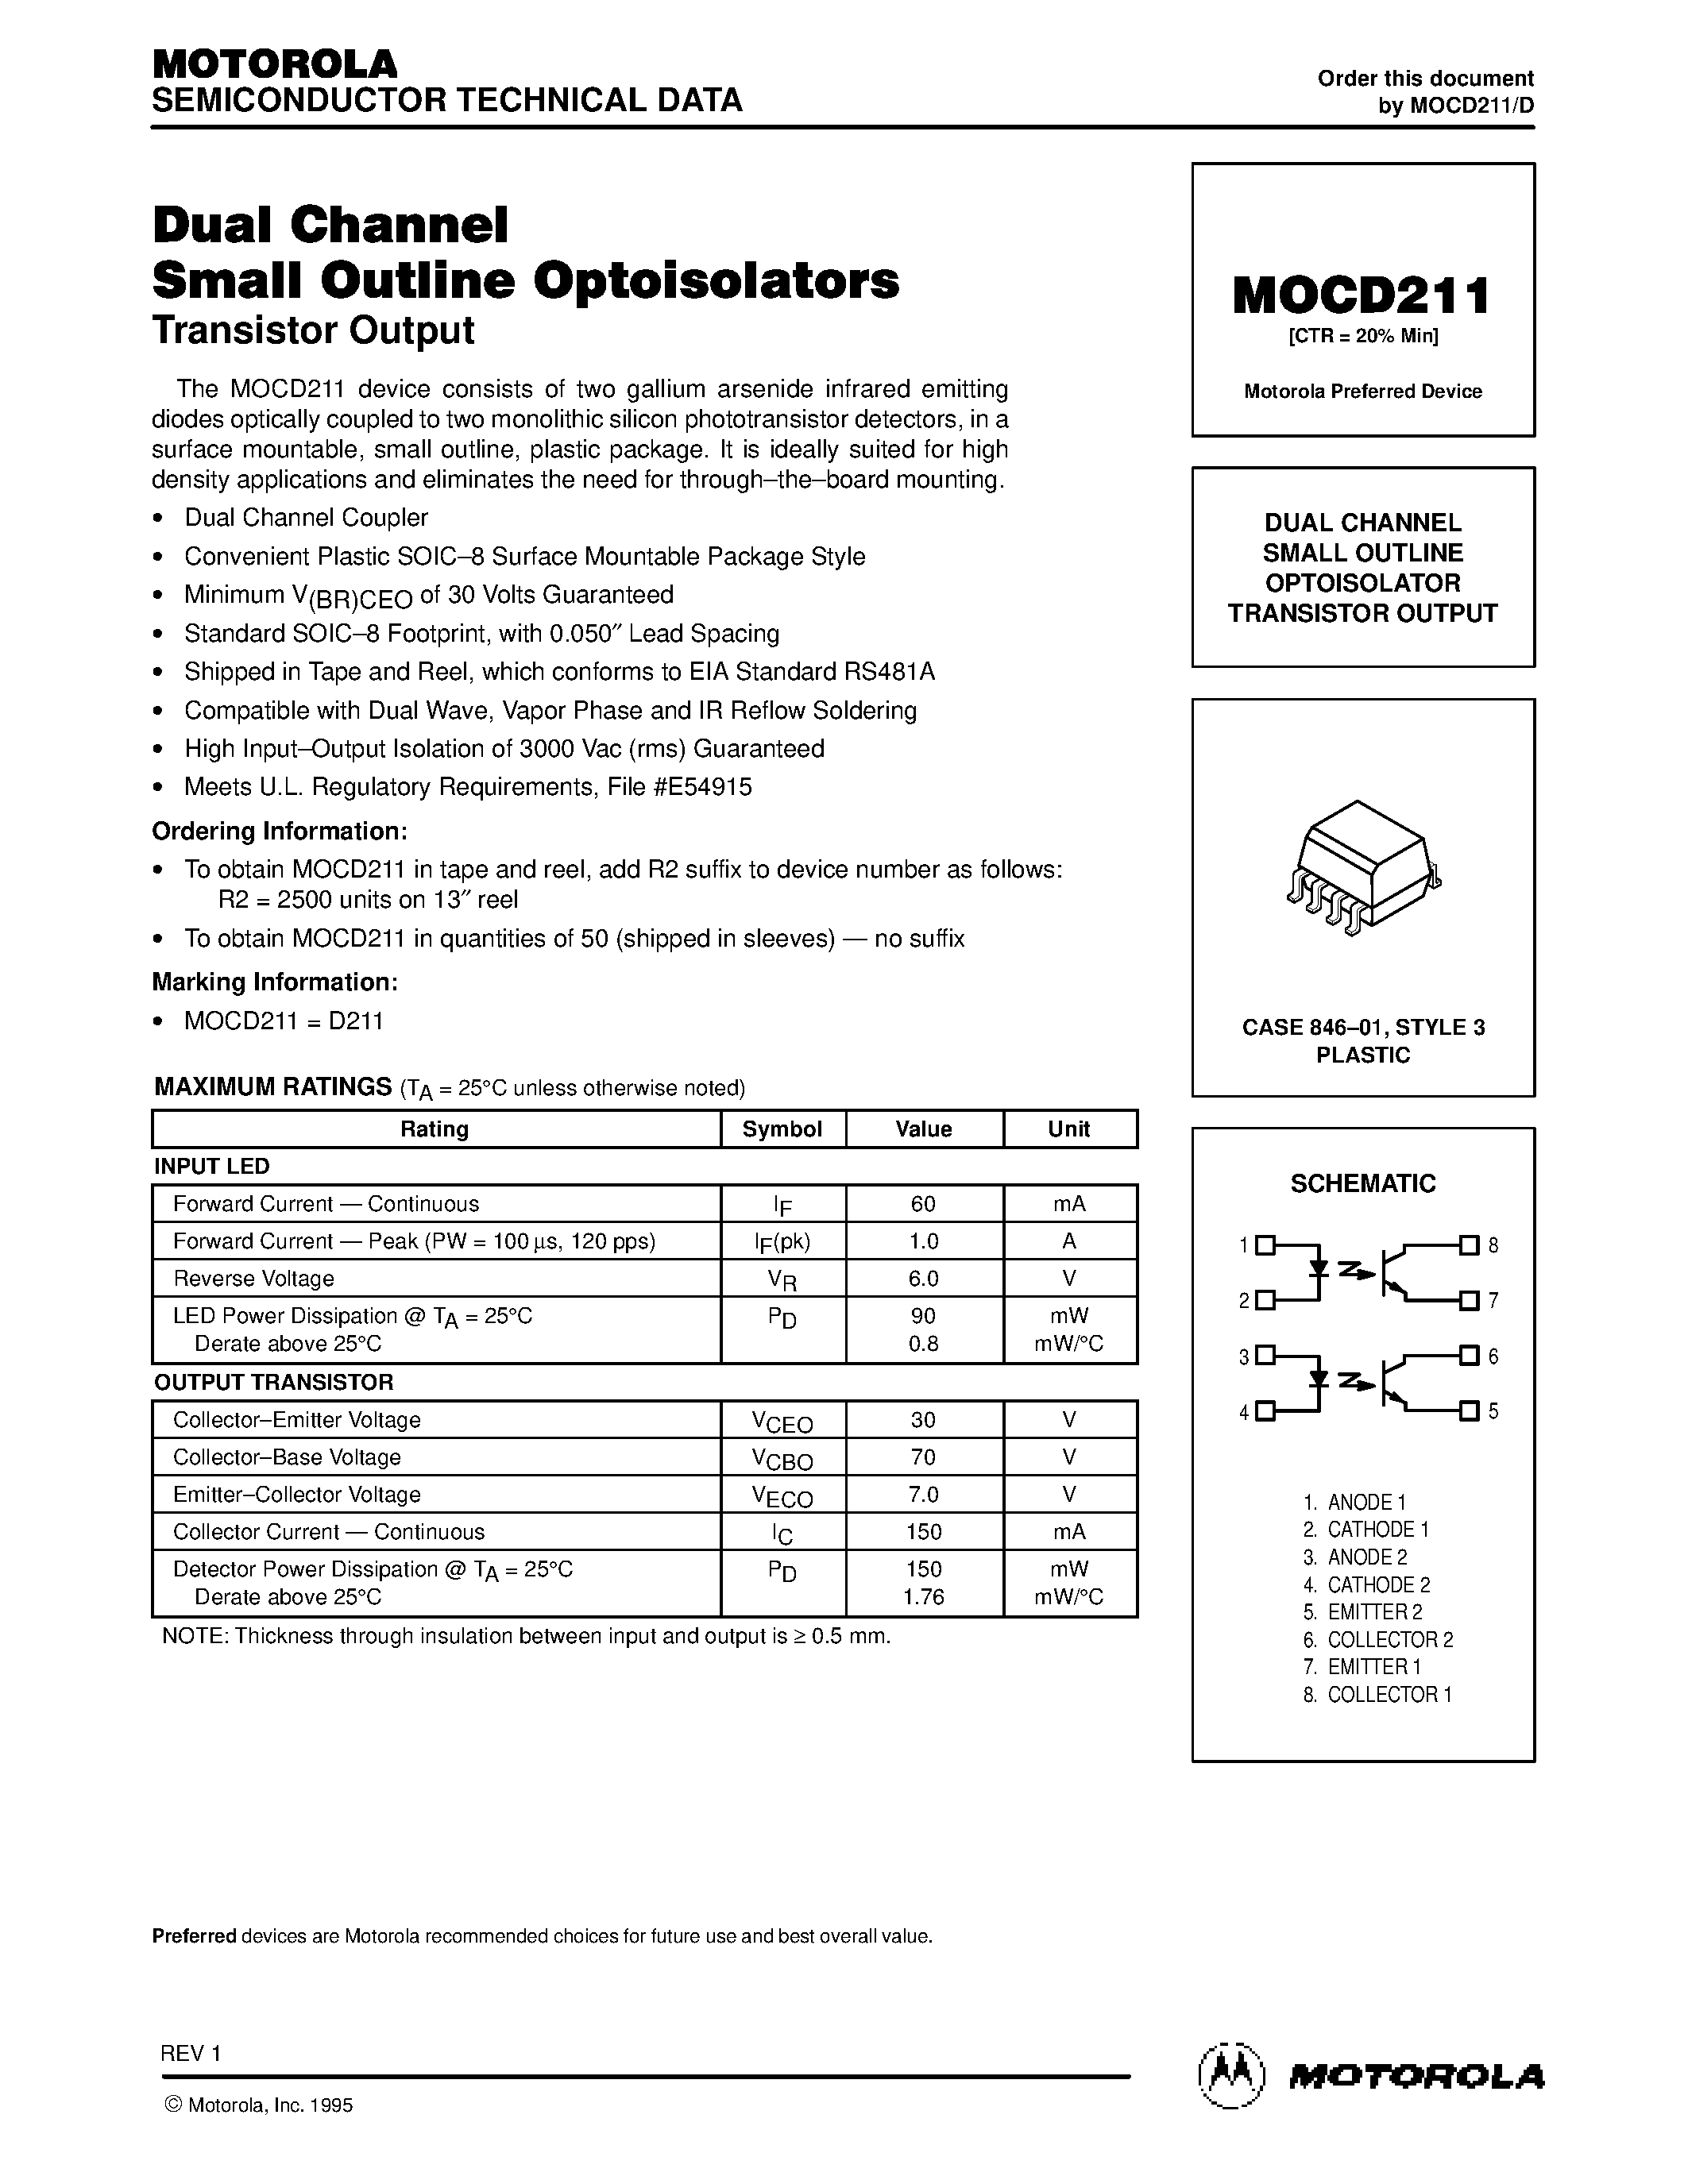 Даташит MOCD211 - DUAL CHANNEL SMALL OUTLINE OPTOISOLATOR TRANSISTOR OUTPUT страница 1